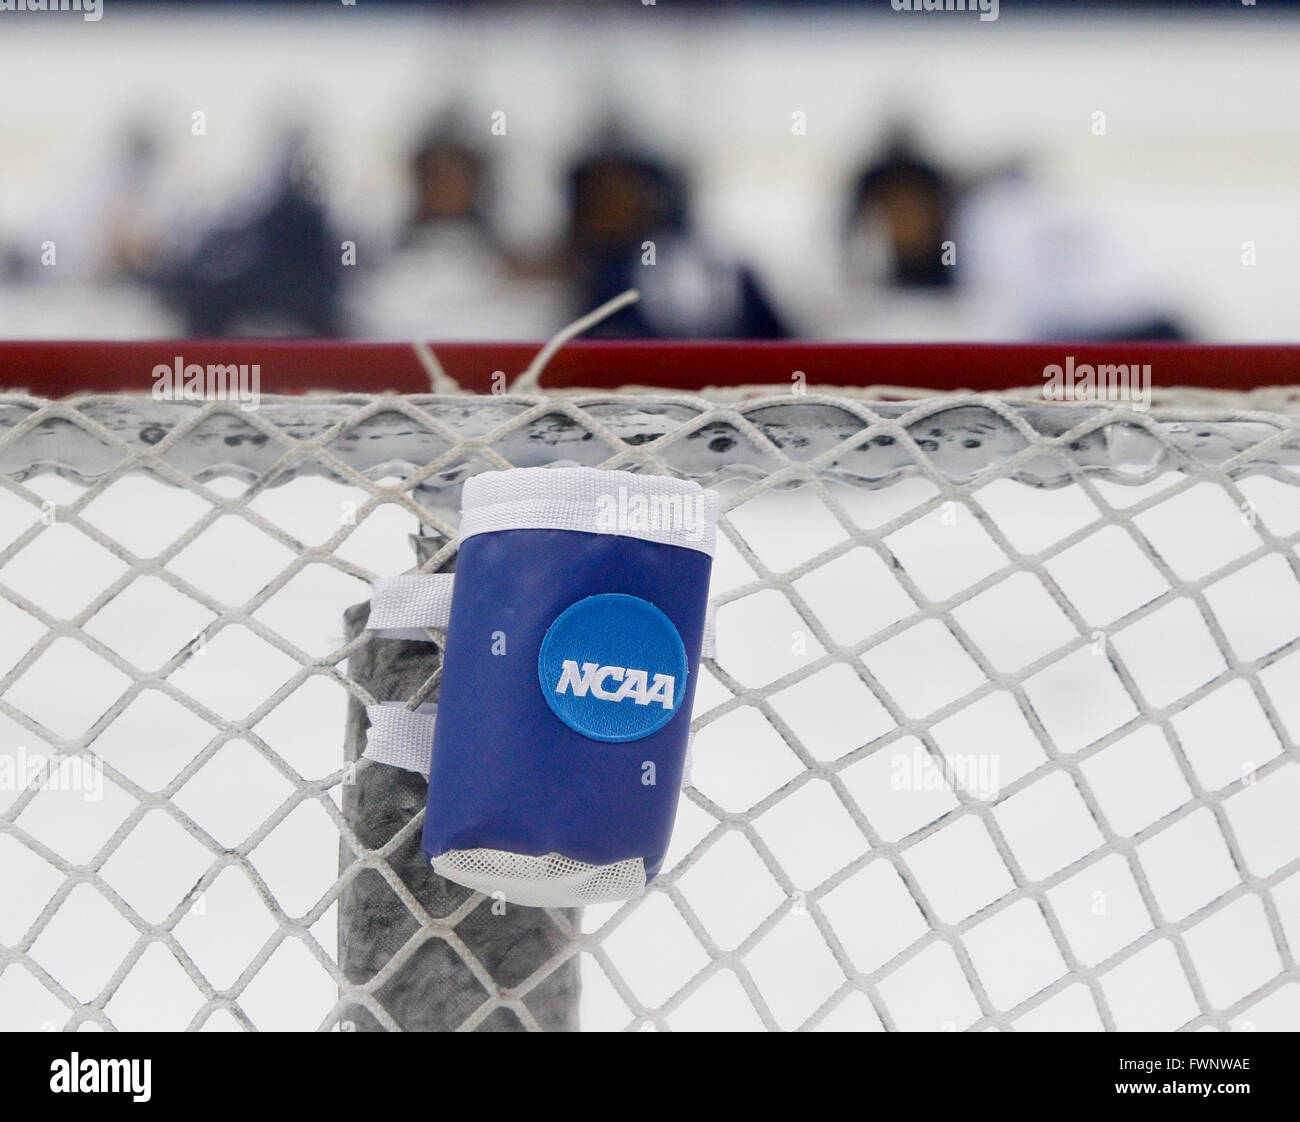 Tampa, Florida, USA. 6th Apr, 2016. DIRK SHADD | Times .NCAA Frozen Four teams take to the ice for practice at Amalie Arena on Wednesday (04/06/16) © Dirk Shadd/Tampa Bay Times/ZUMA Wire/Alamy Live News Stock Photo